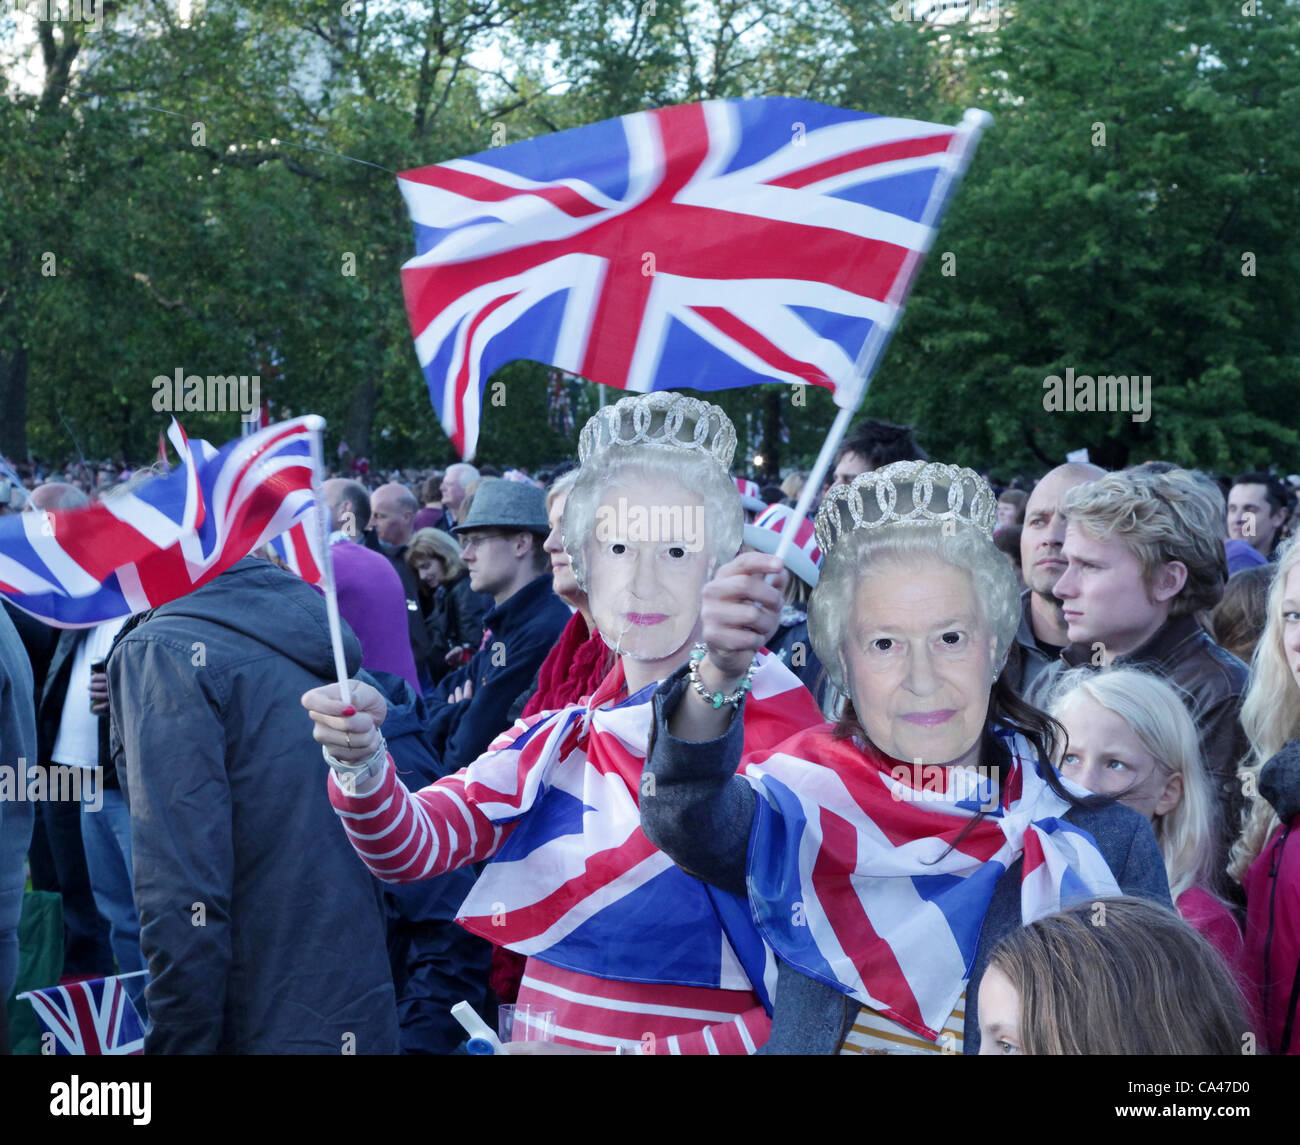 London, UK. June 4, 2012. Two teenager girls with 'Queen' masks enjoying the music at the Concert to celebrate The Queen's Diamond Jubilee in St. James's Park watching the big screens, waving flags. Stock Photo